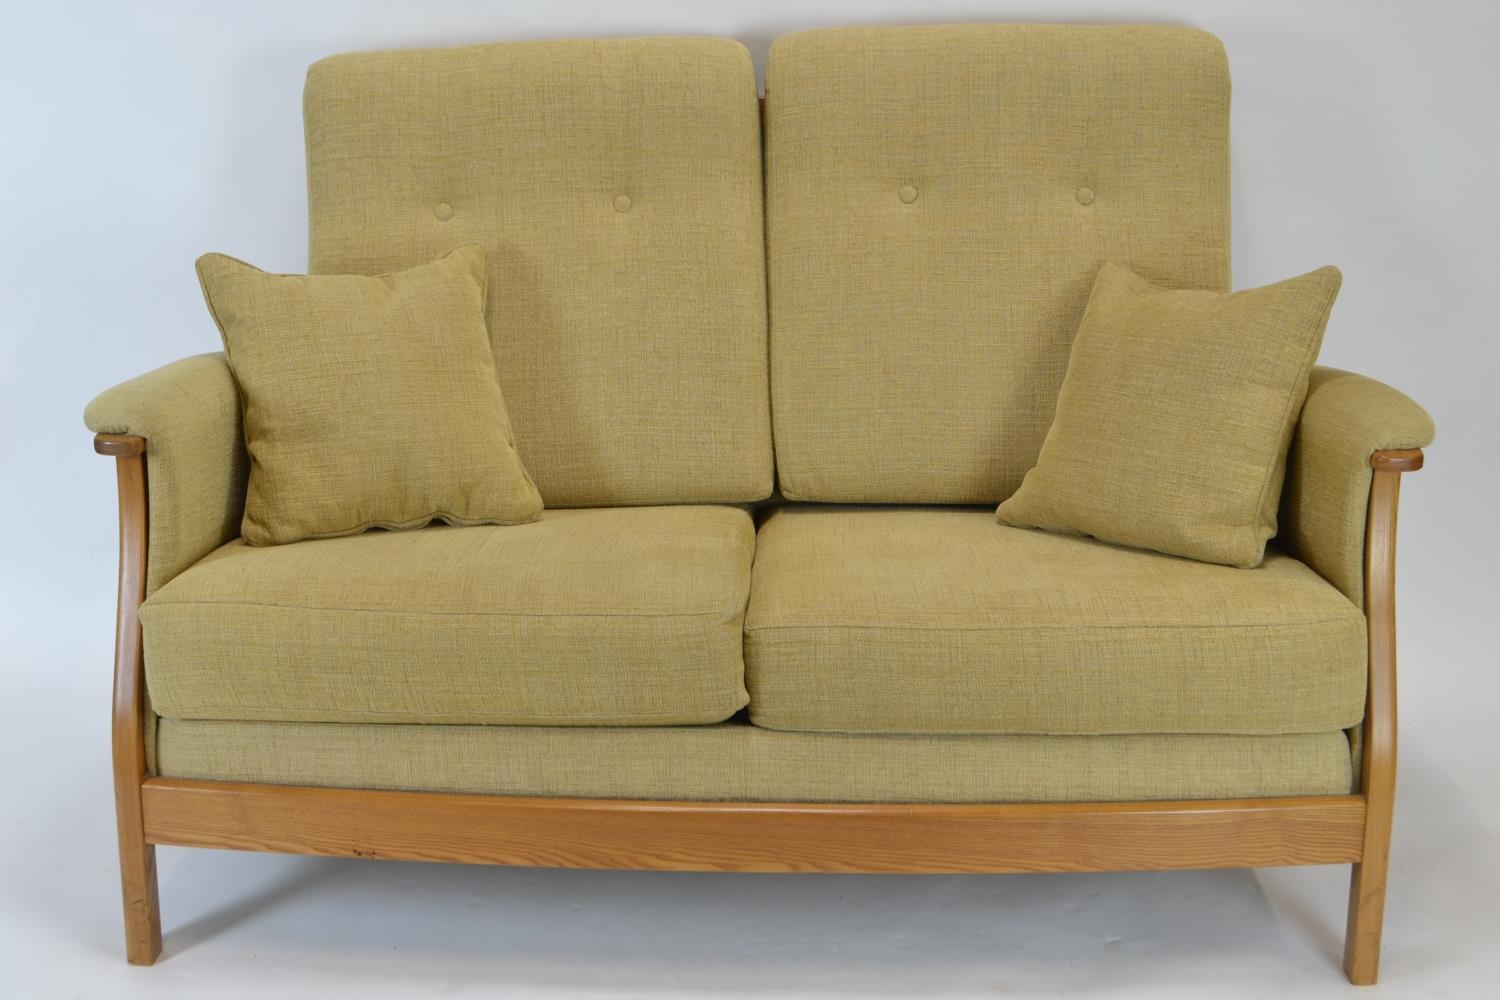 Elm framed two seater Ercol sofa in natural finish h90cm x w144cm x d70cm 